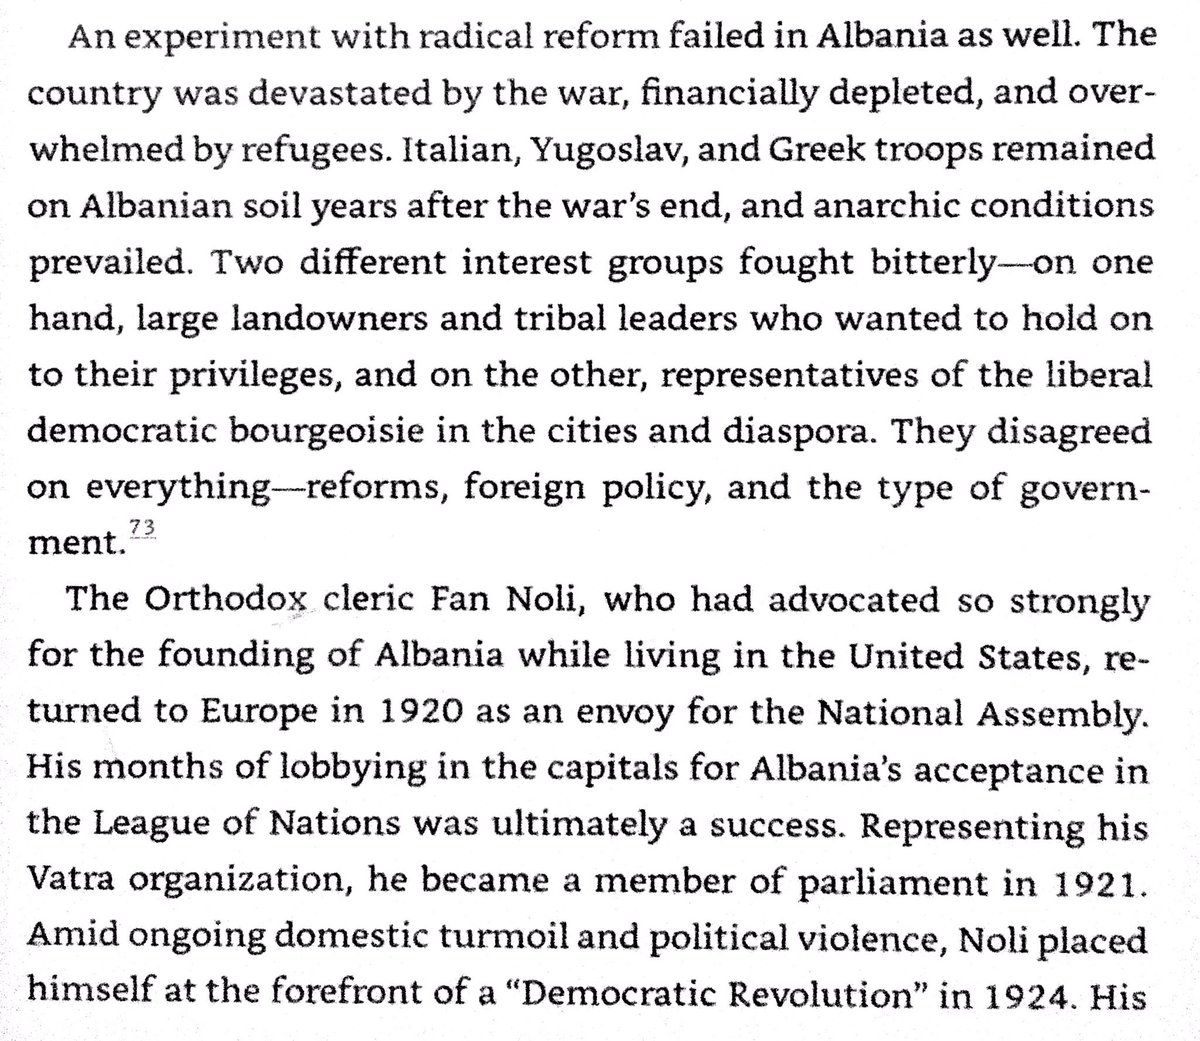 Foreign troops occupied anarchic Albania for years after WWI. Tribes & landholders fought liberal bourgeois. 1924 the liberals tried to make gradual reforms, but ran into intense opposition from landholders. President Ahmet Zogu expelled liberals, then in 1928 became king.